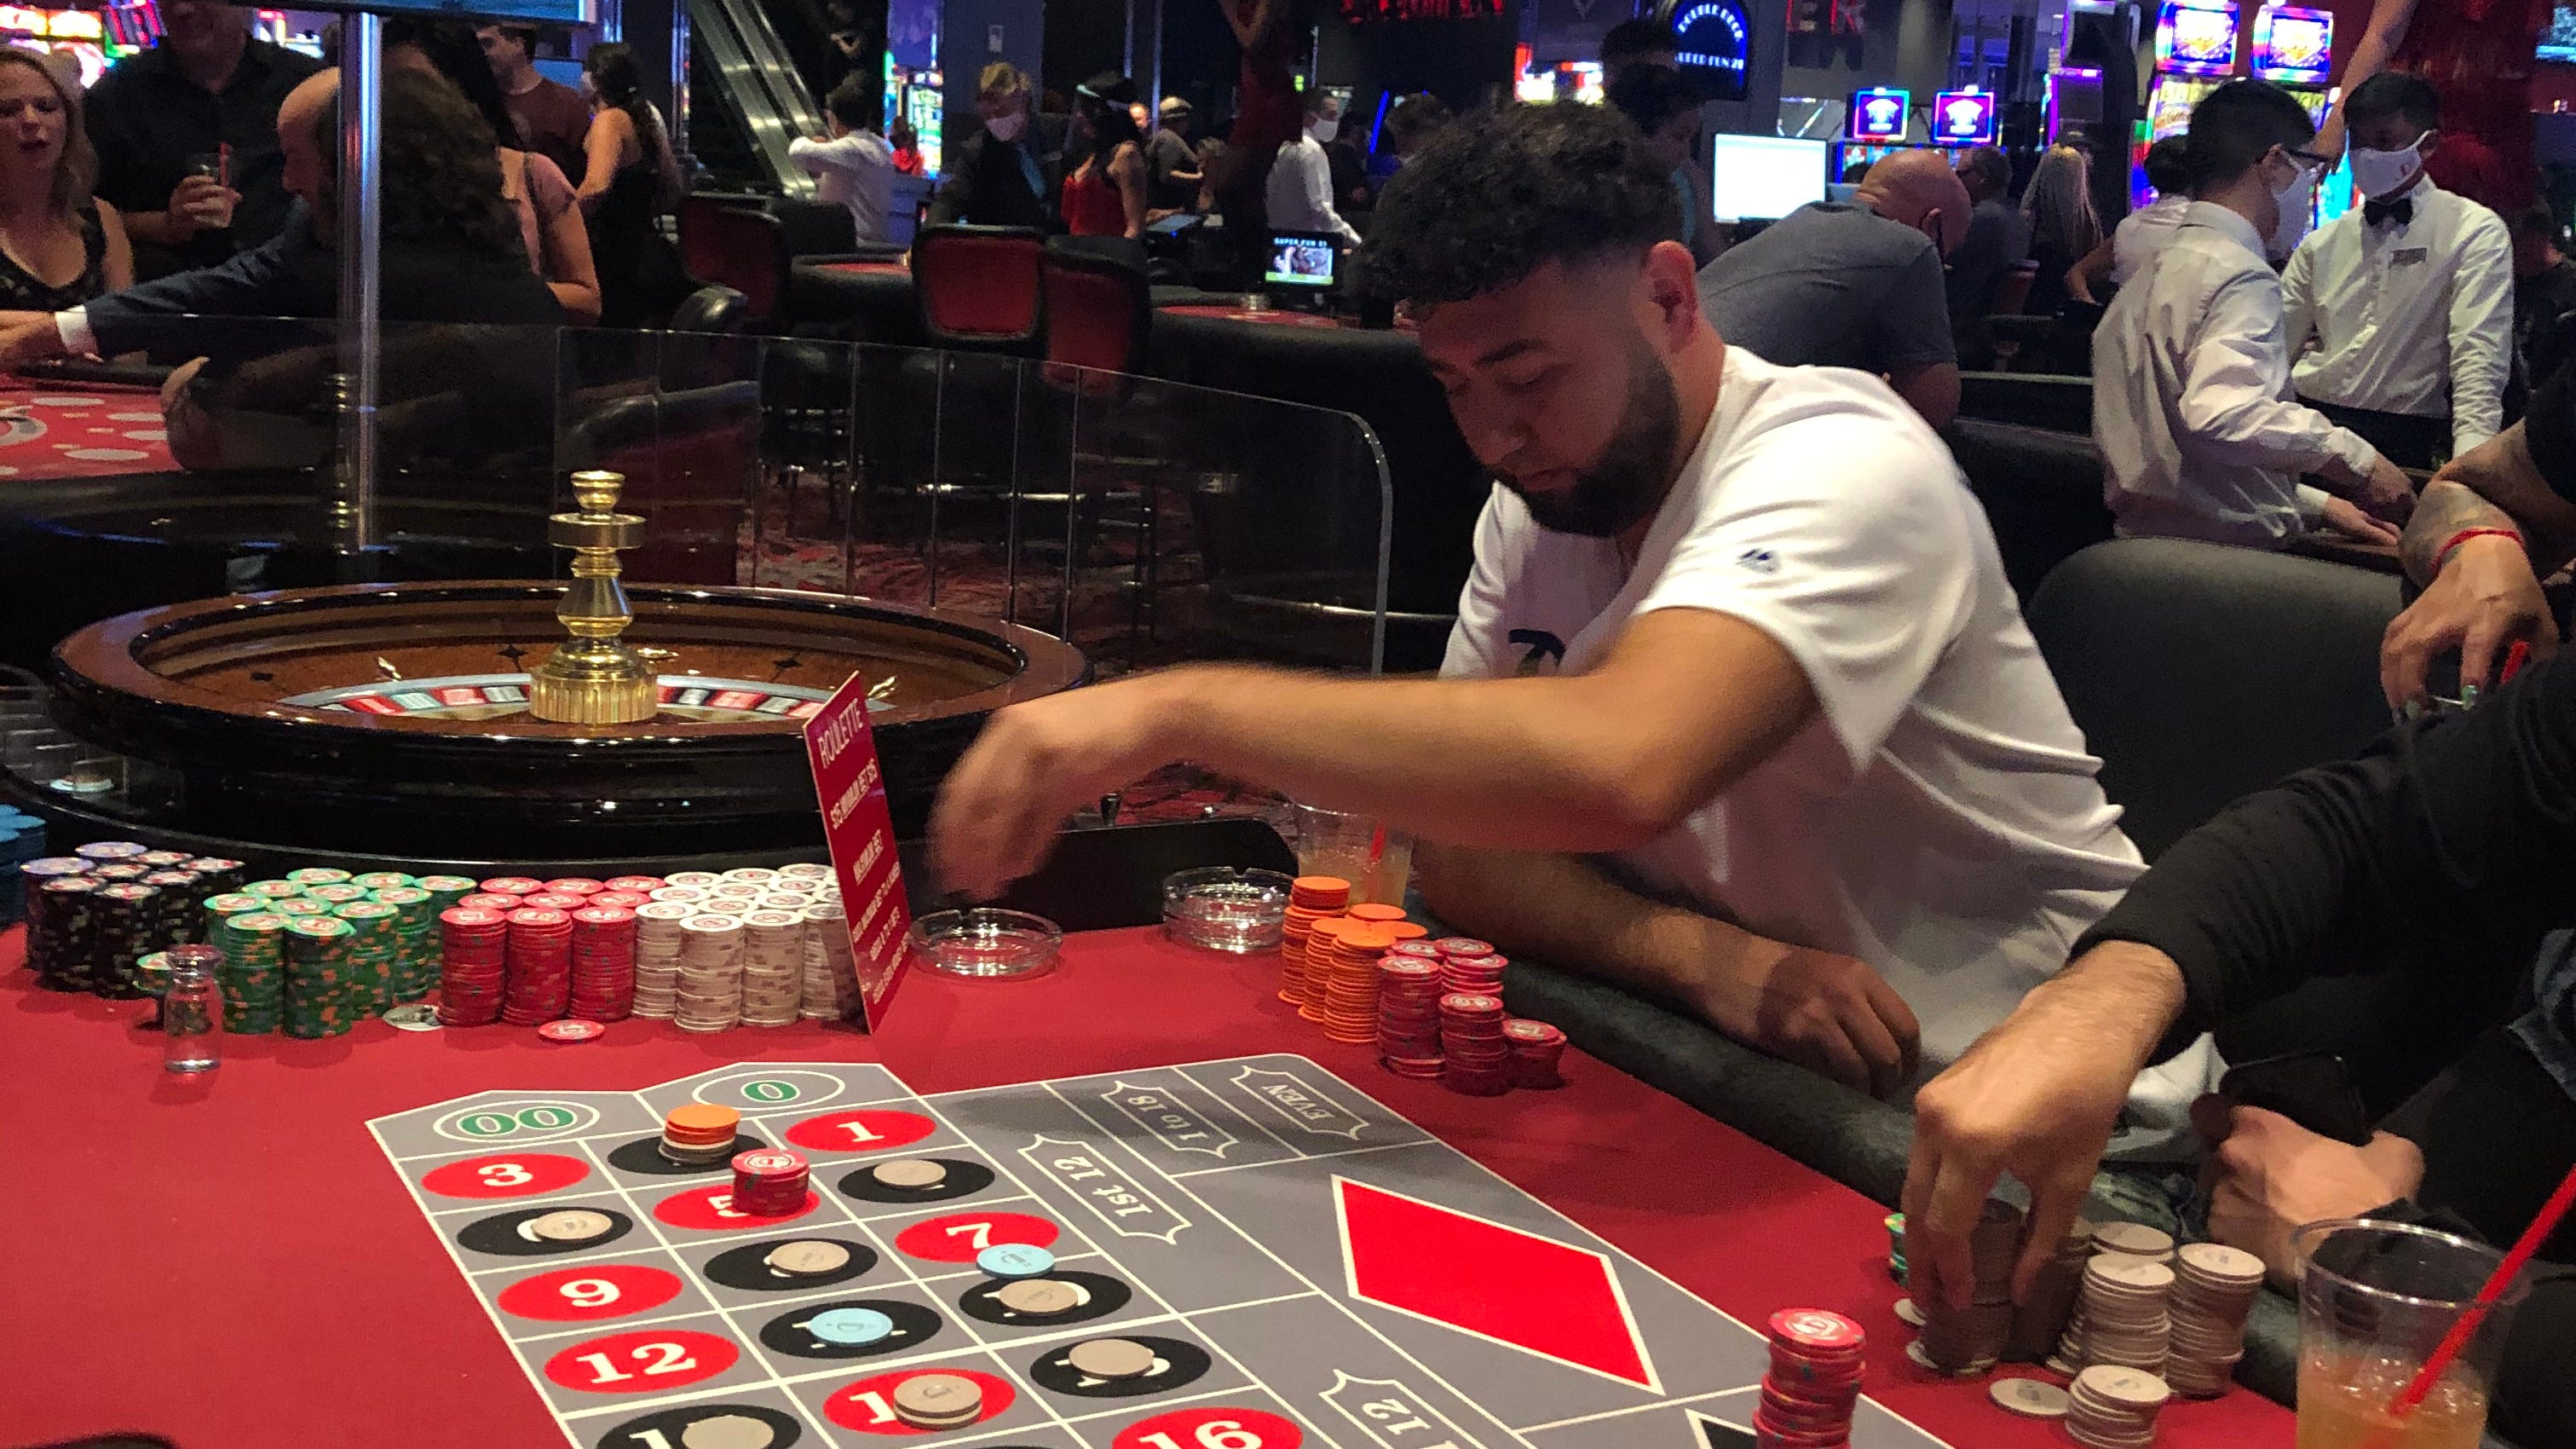 'Best day ever': Gamblers flock to downtown Las Vegas on first night of casino reopenings - USA TODAY